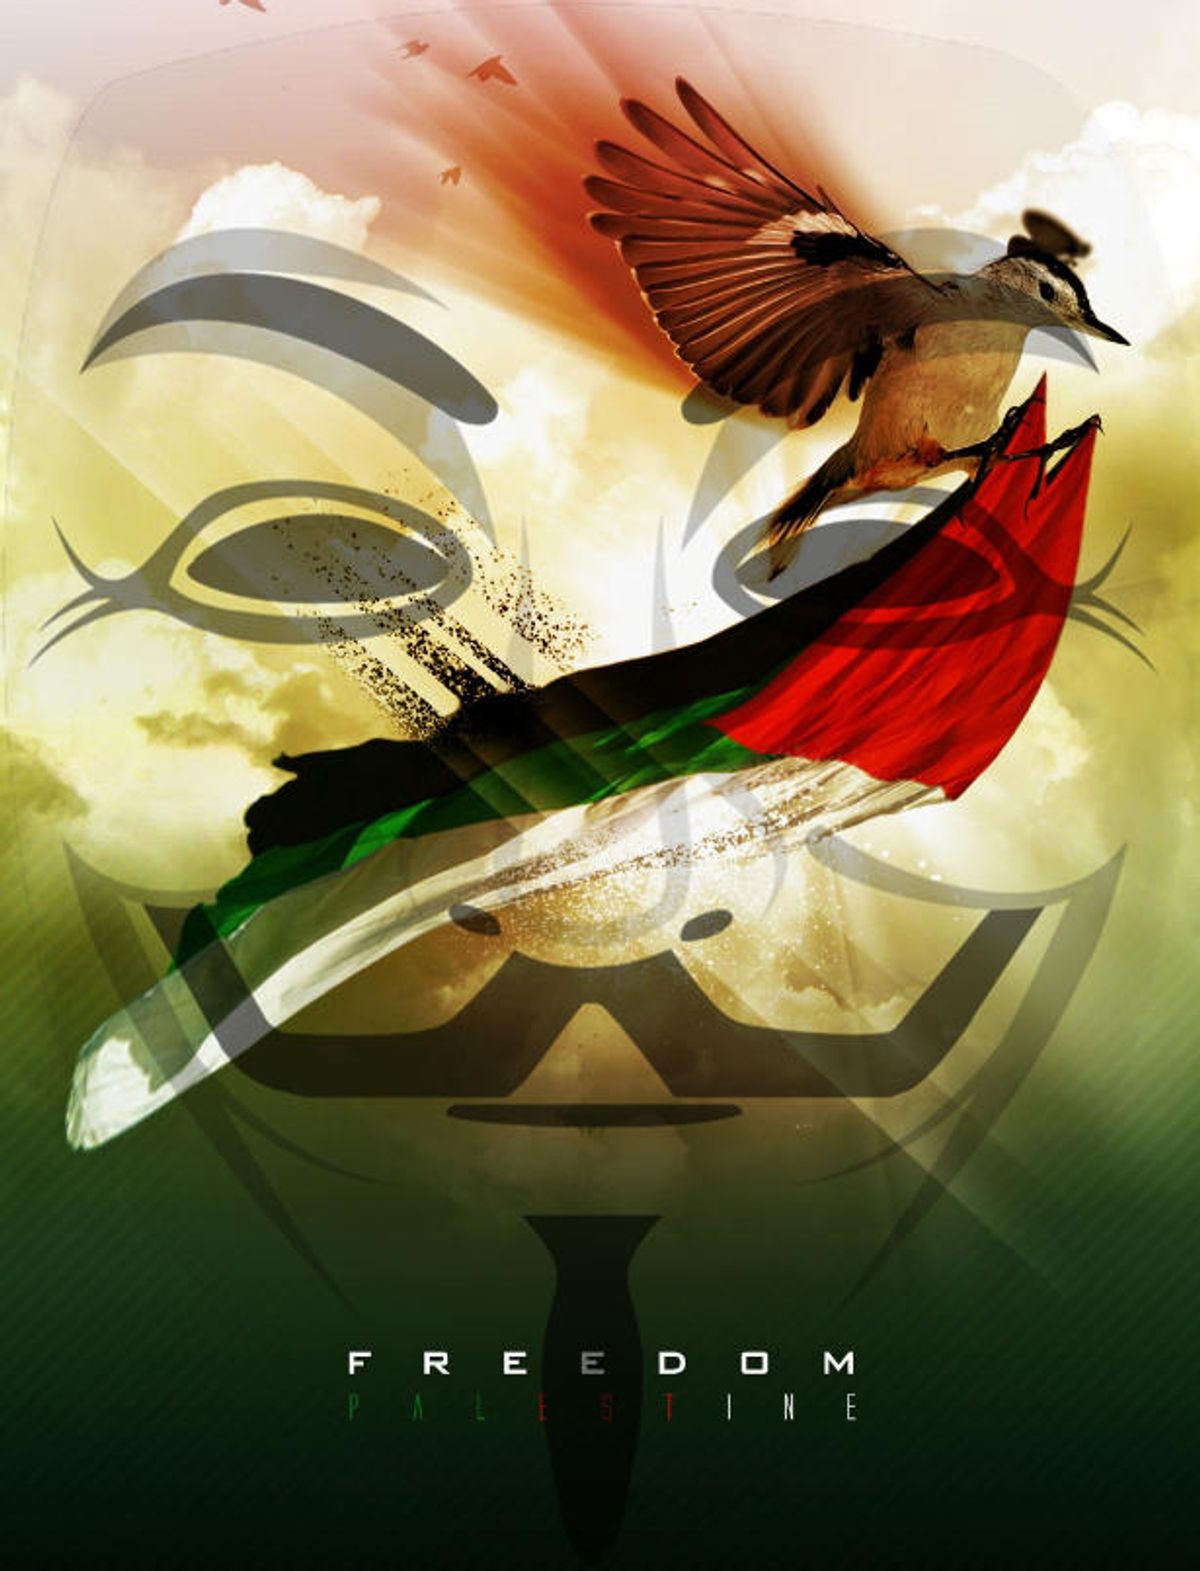  Anonymous posts a "Free Palestine" image on Twitter (via @YourAnonNews)  